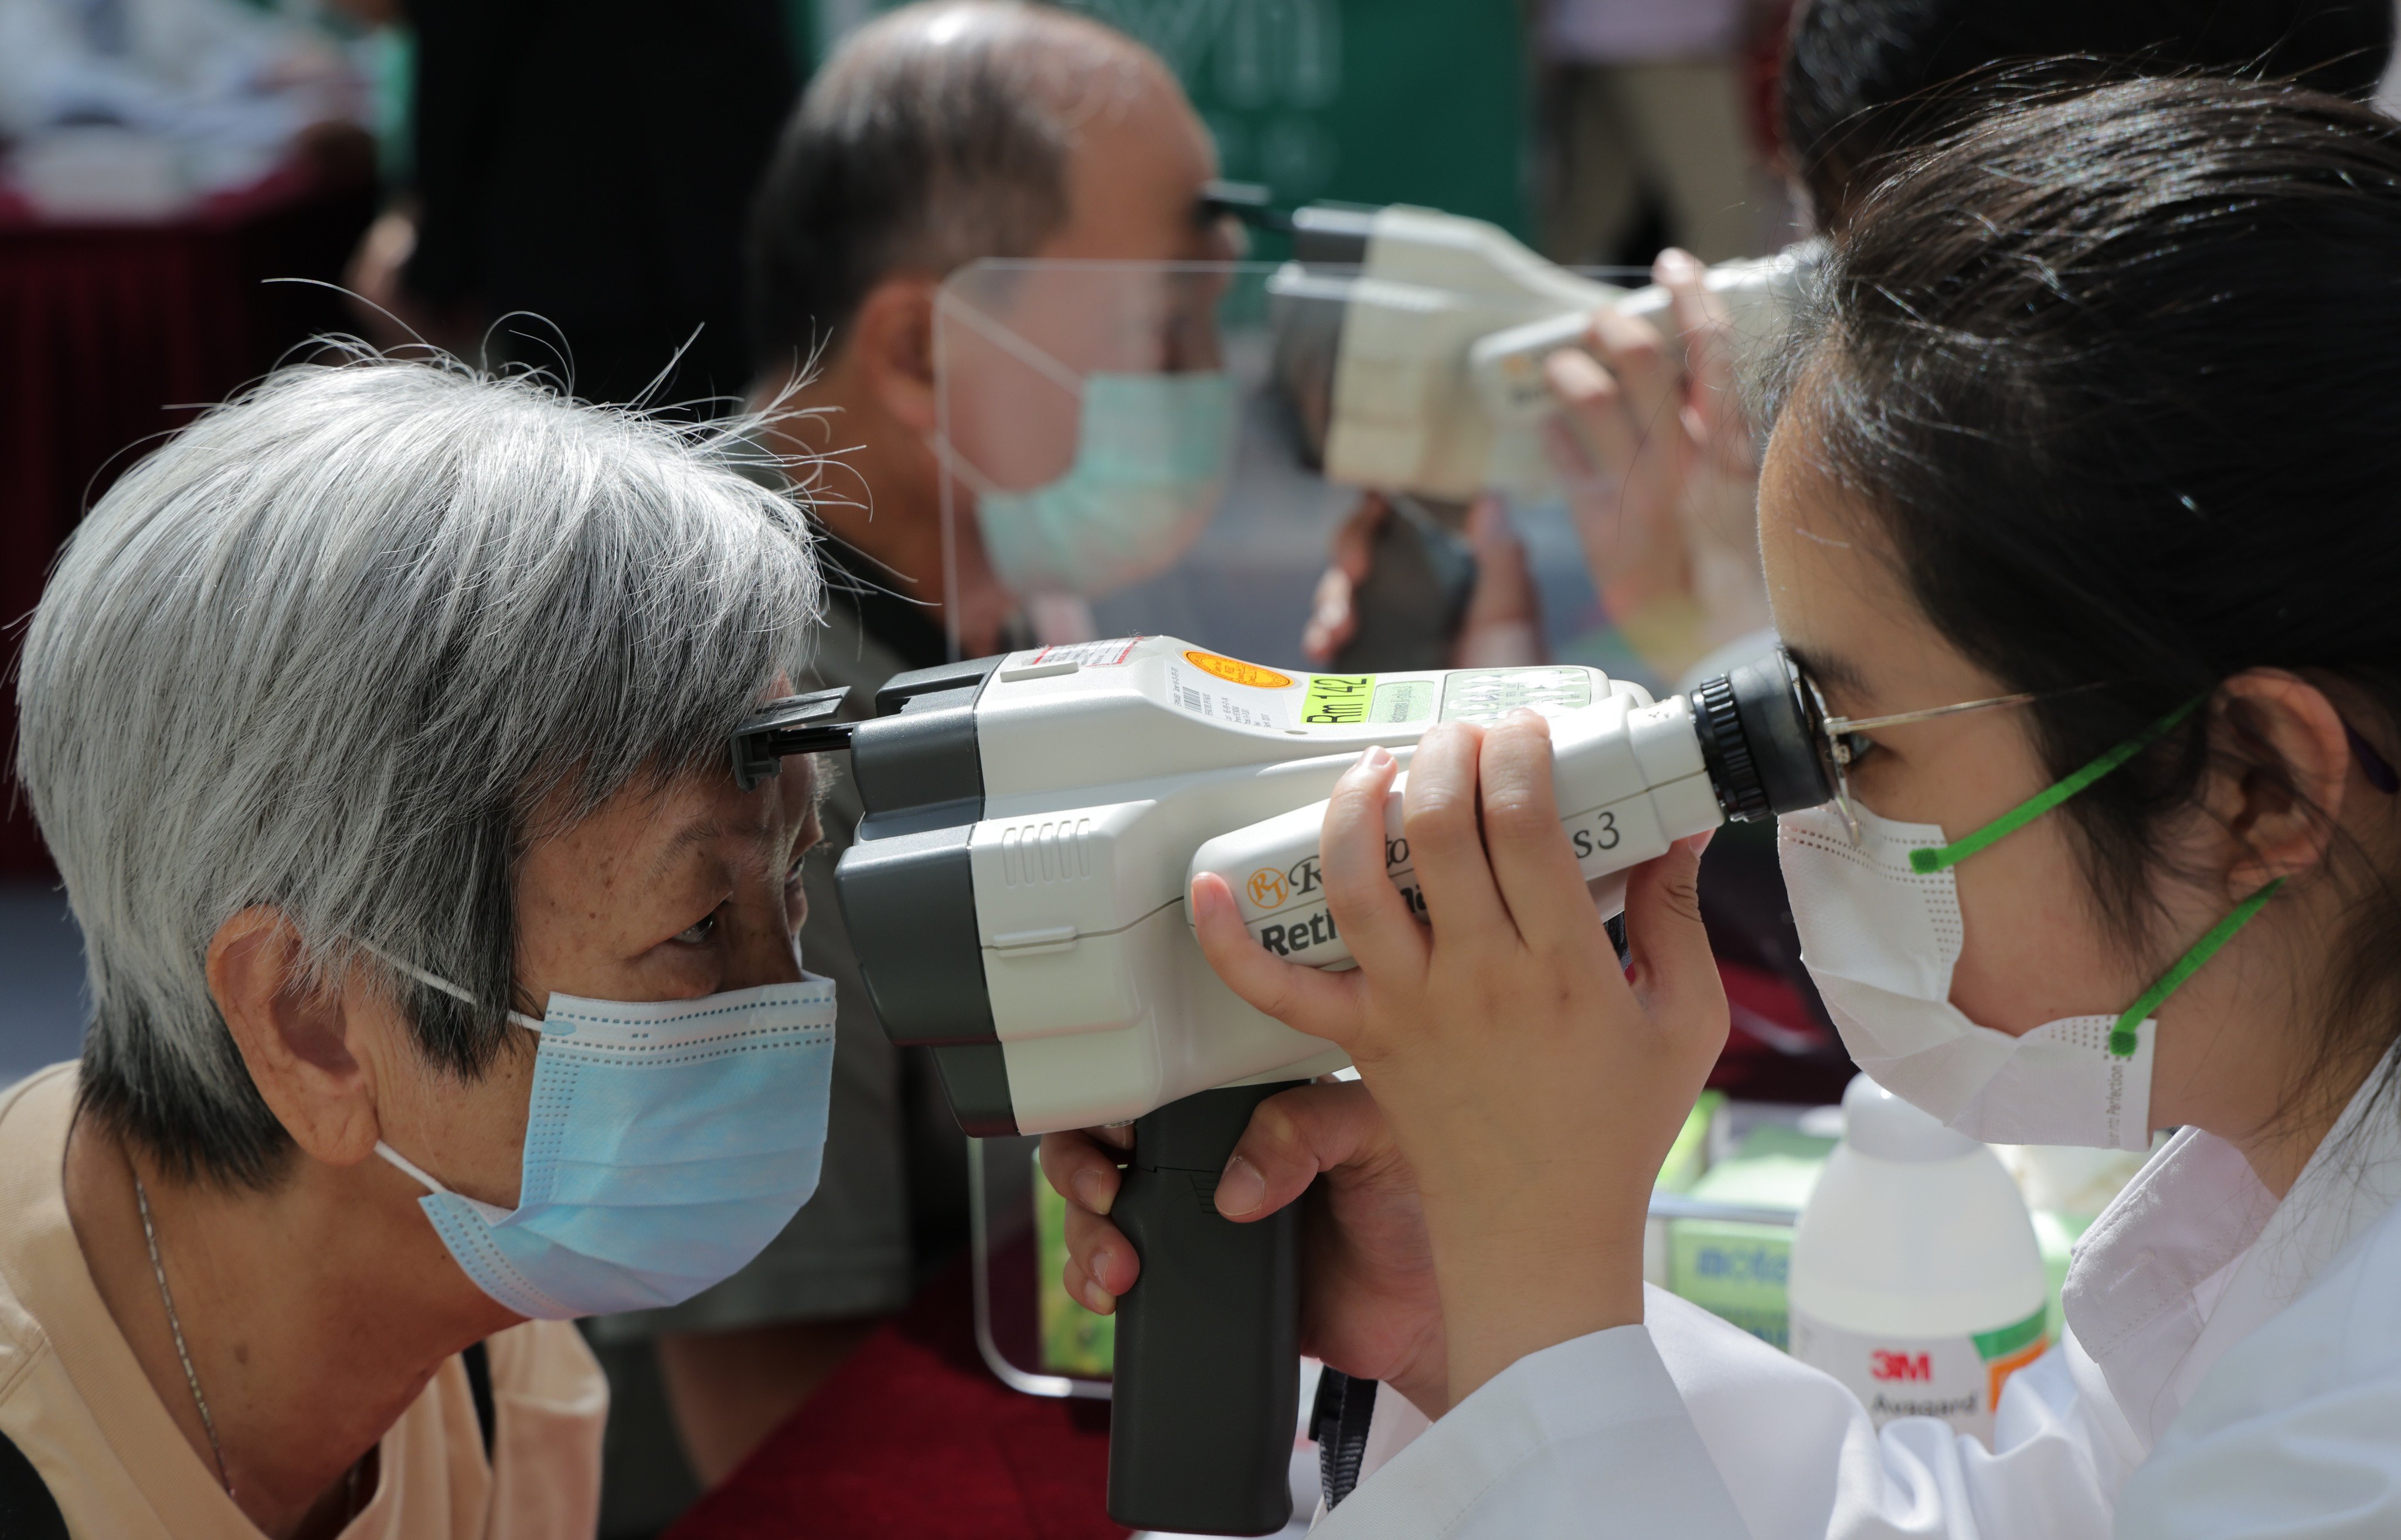 Free eye checks are provided at the “Health In Sight” exhibition organised by the Chinese University of Hong Kong’s Medical Society in Ma On Shan on October 15, 2022. Photo: Jelly Tse